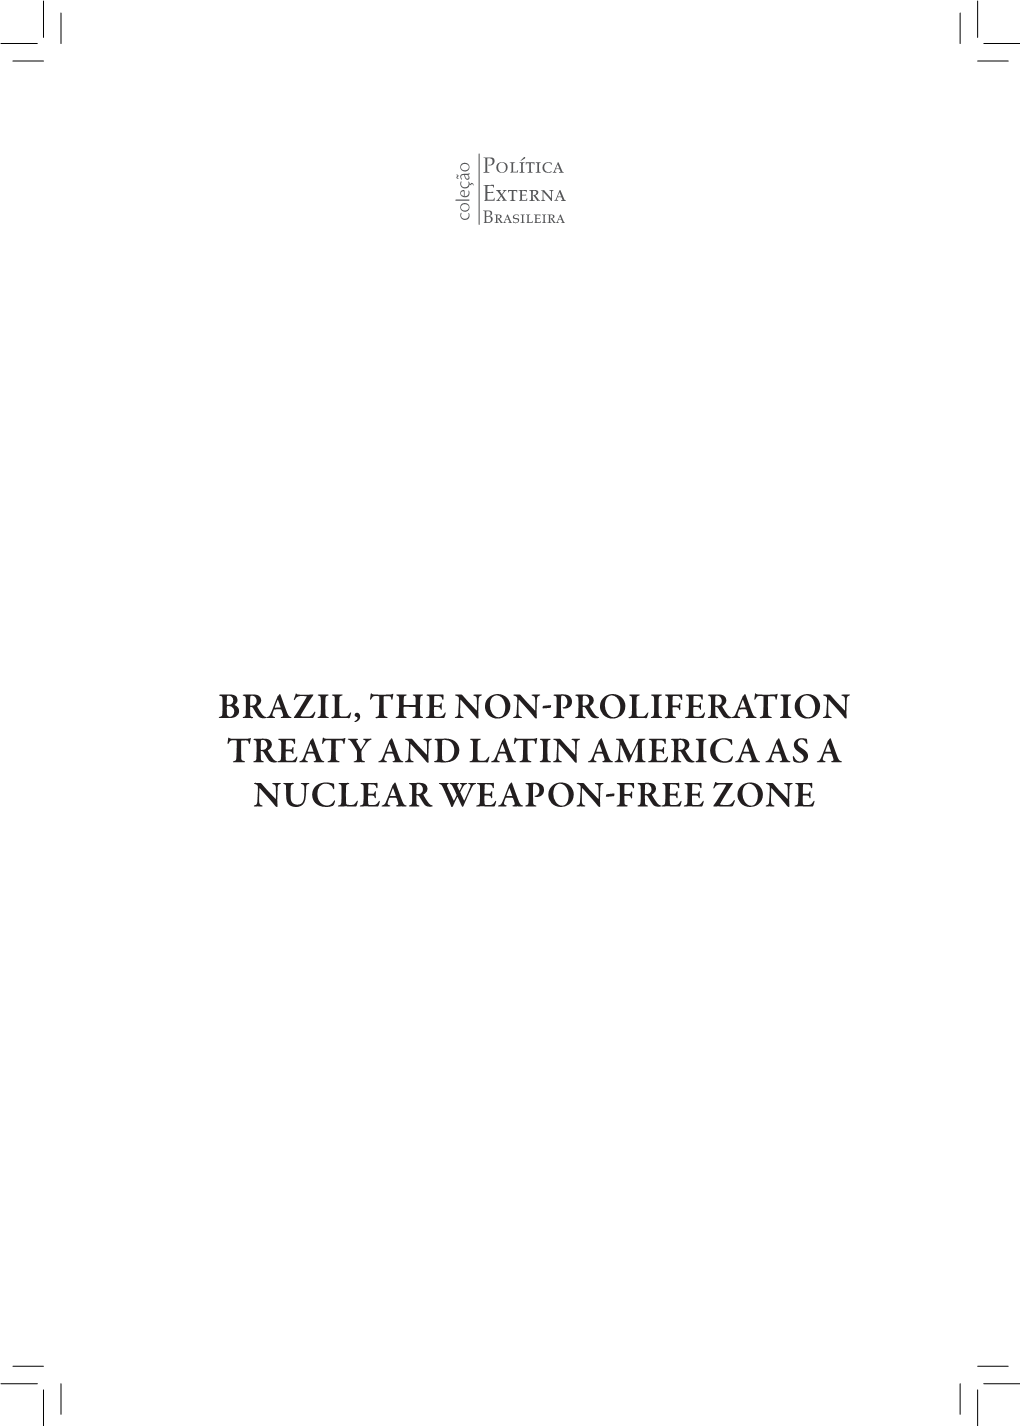 The Non-Proliferation Treaty and Latin America As a Nuclear Weapon-Free Zone